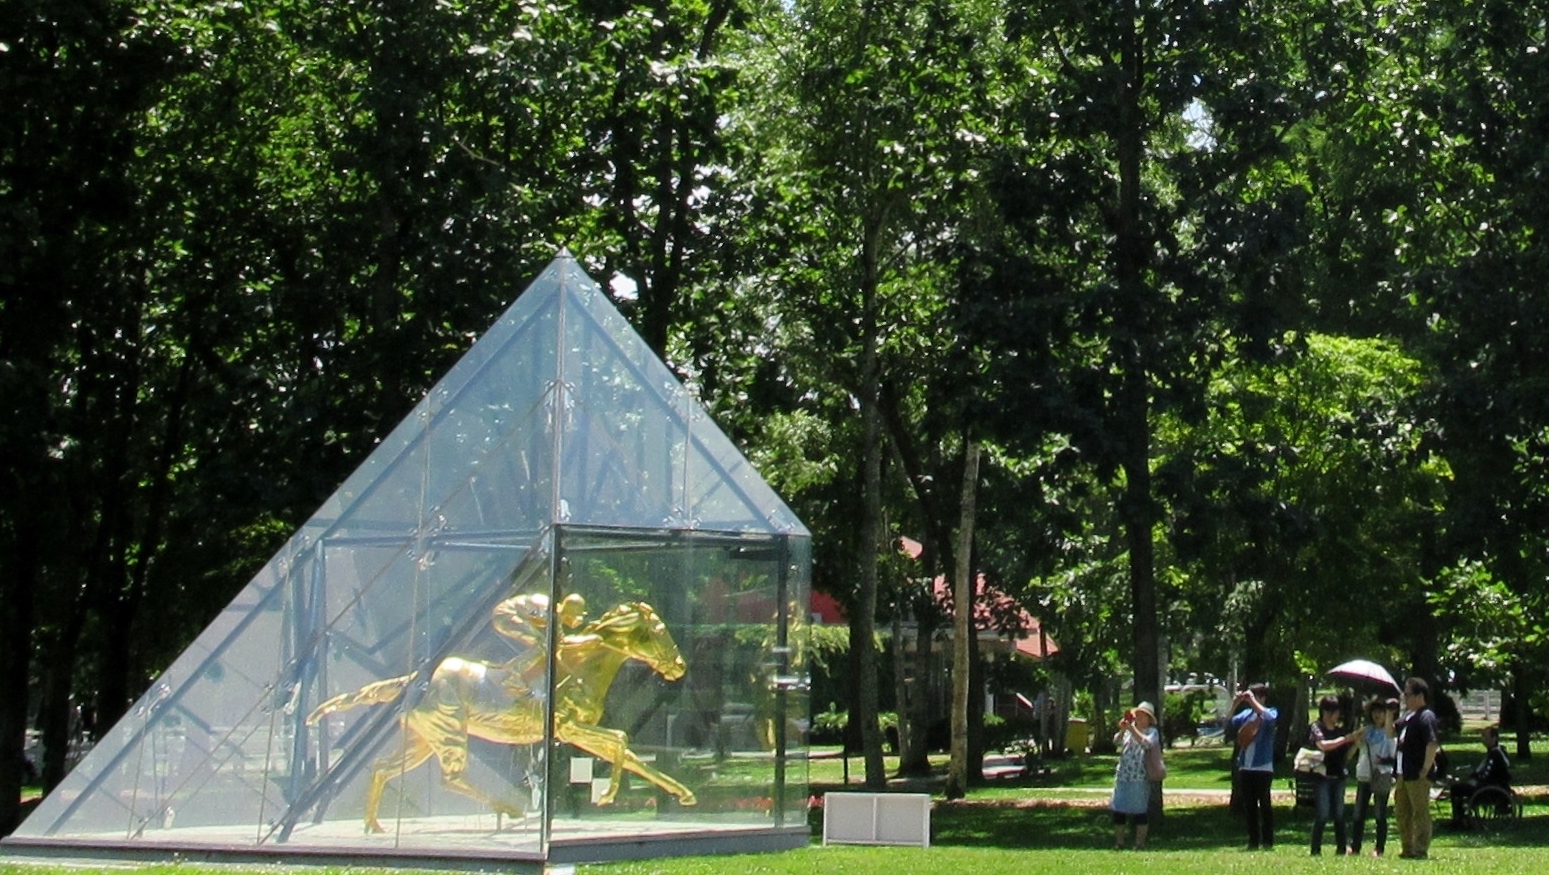 Immortalised: a gold statue of 2000 Kentucky Derby winner Fusaichi Pegasus encased in a glass pyramid is one of the main attractions at Northern Horse Park. Photo: Amanda Duckworth